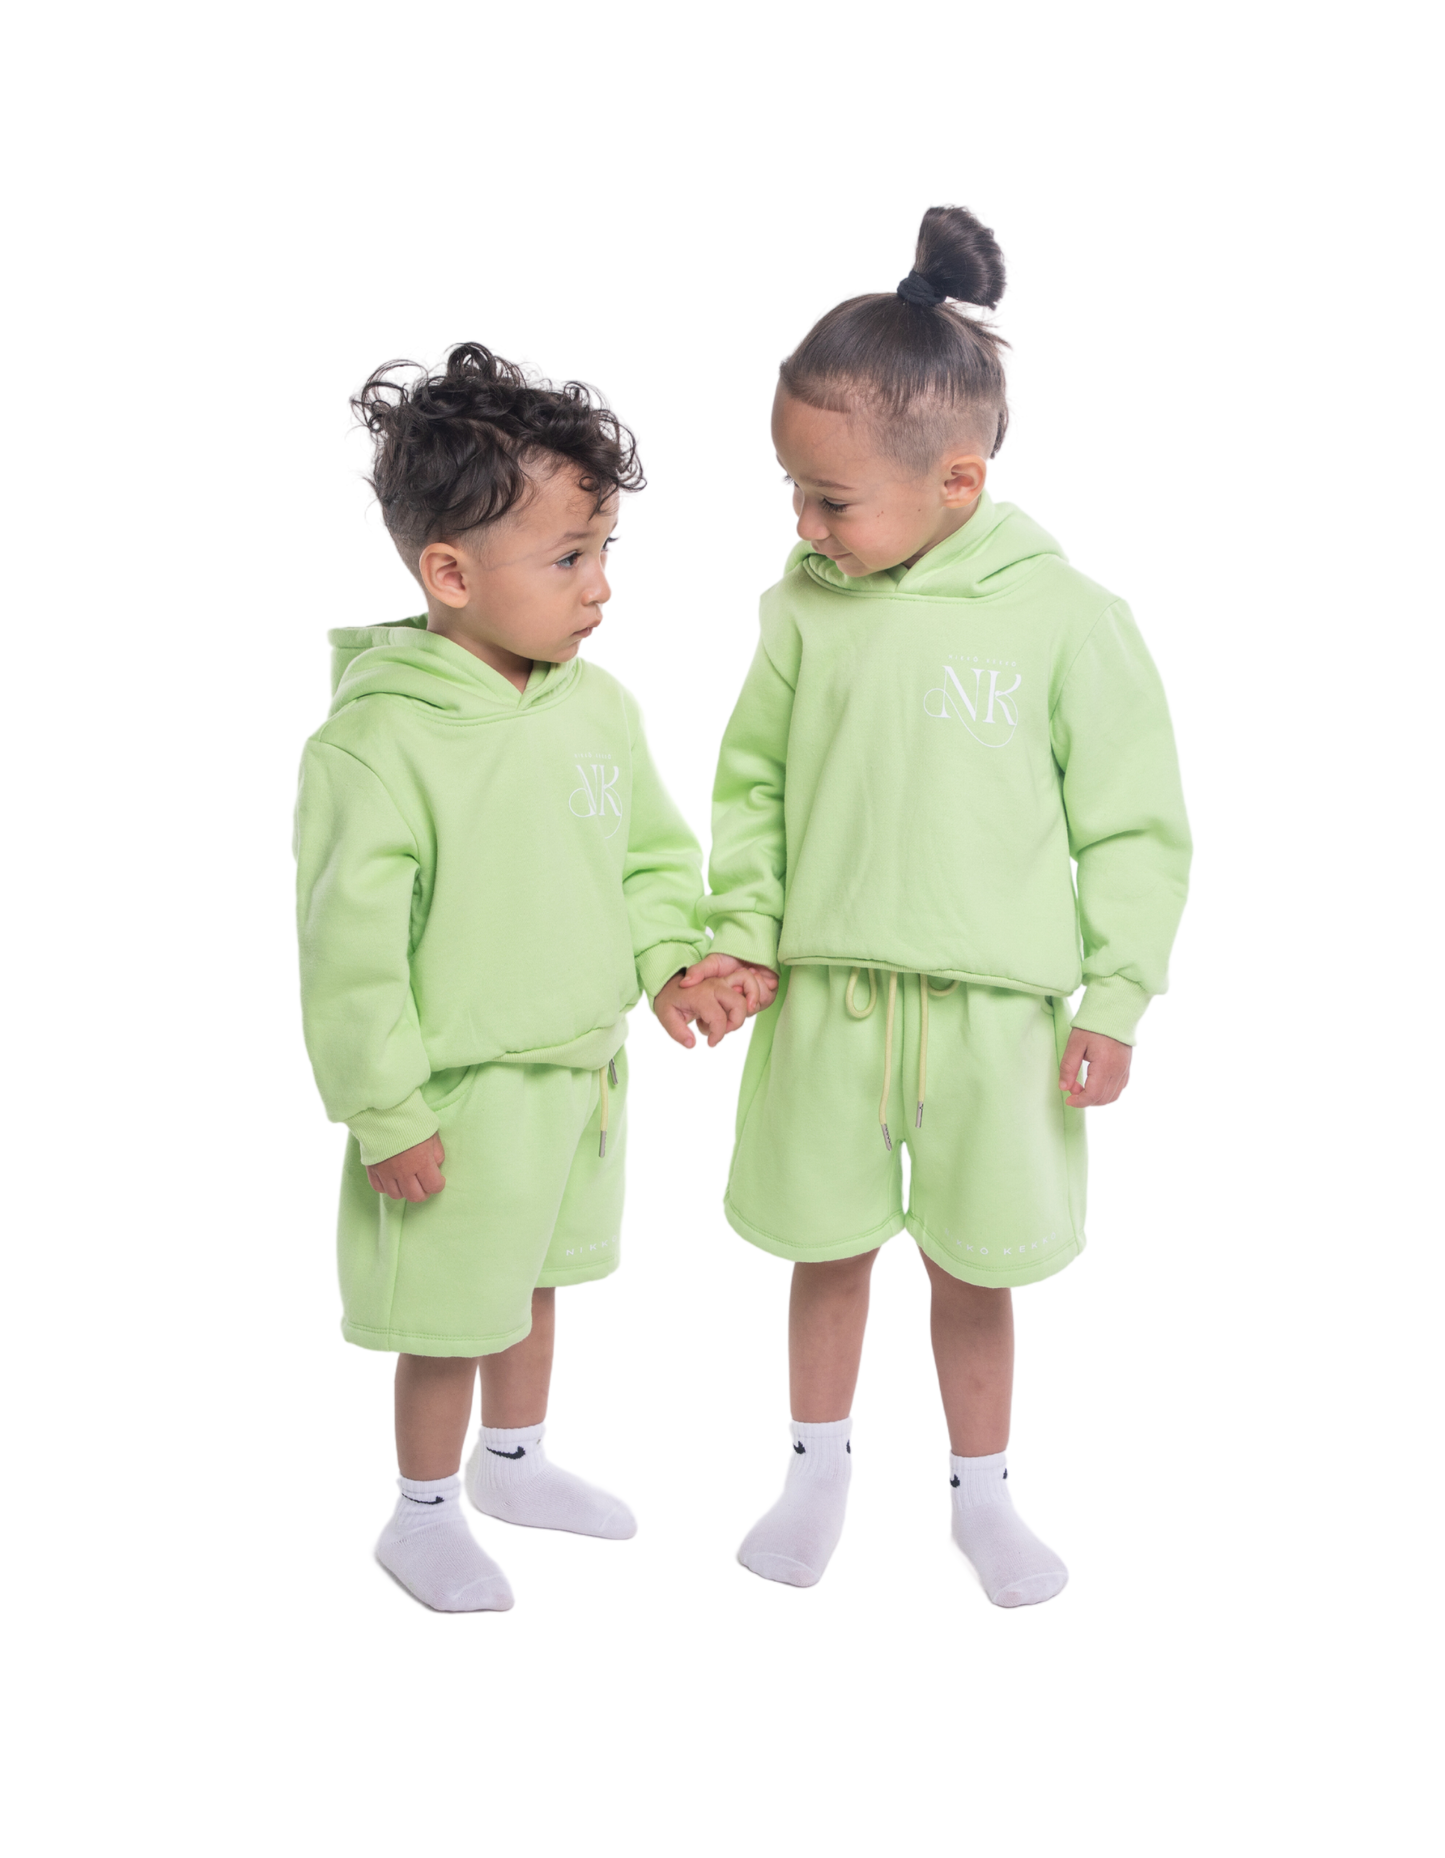 Green Matching Mommy and Me Kids Shorts